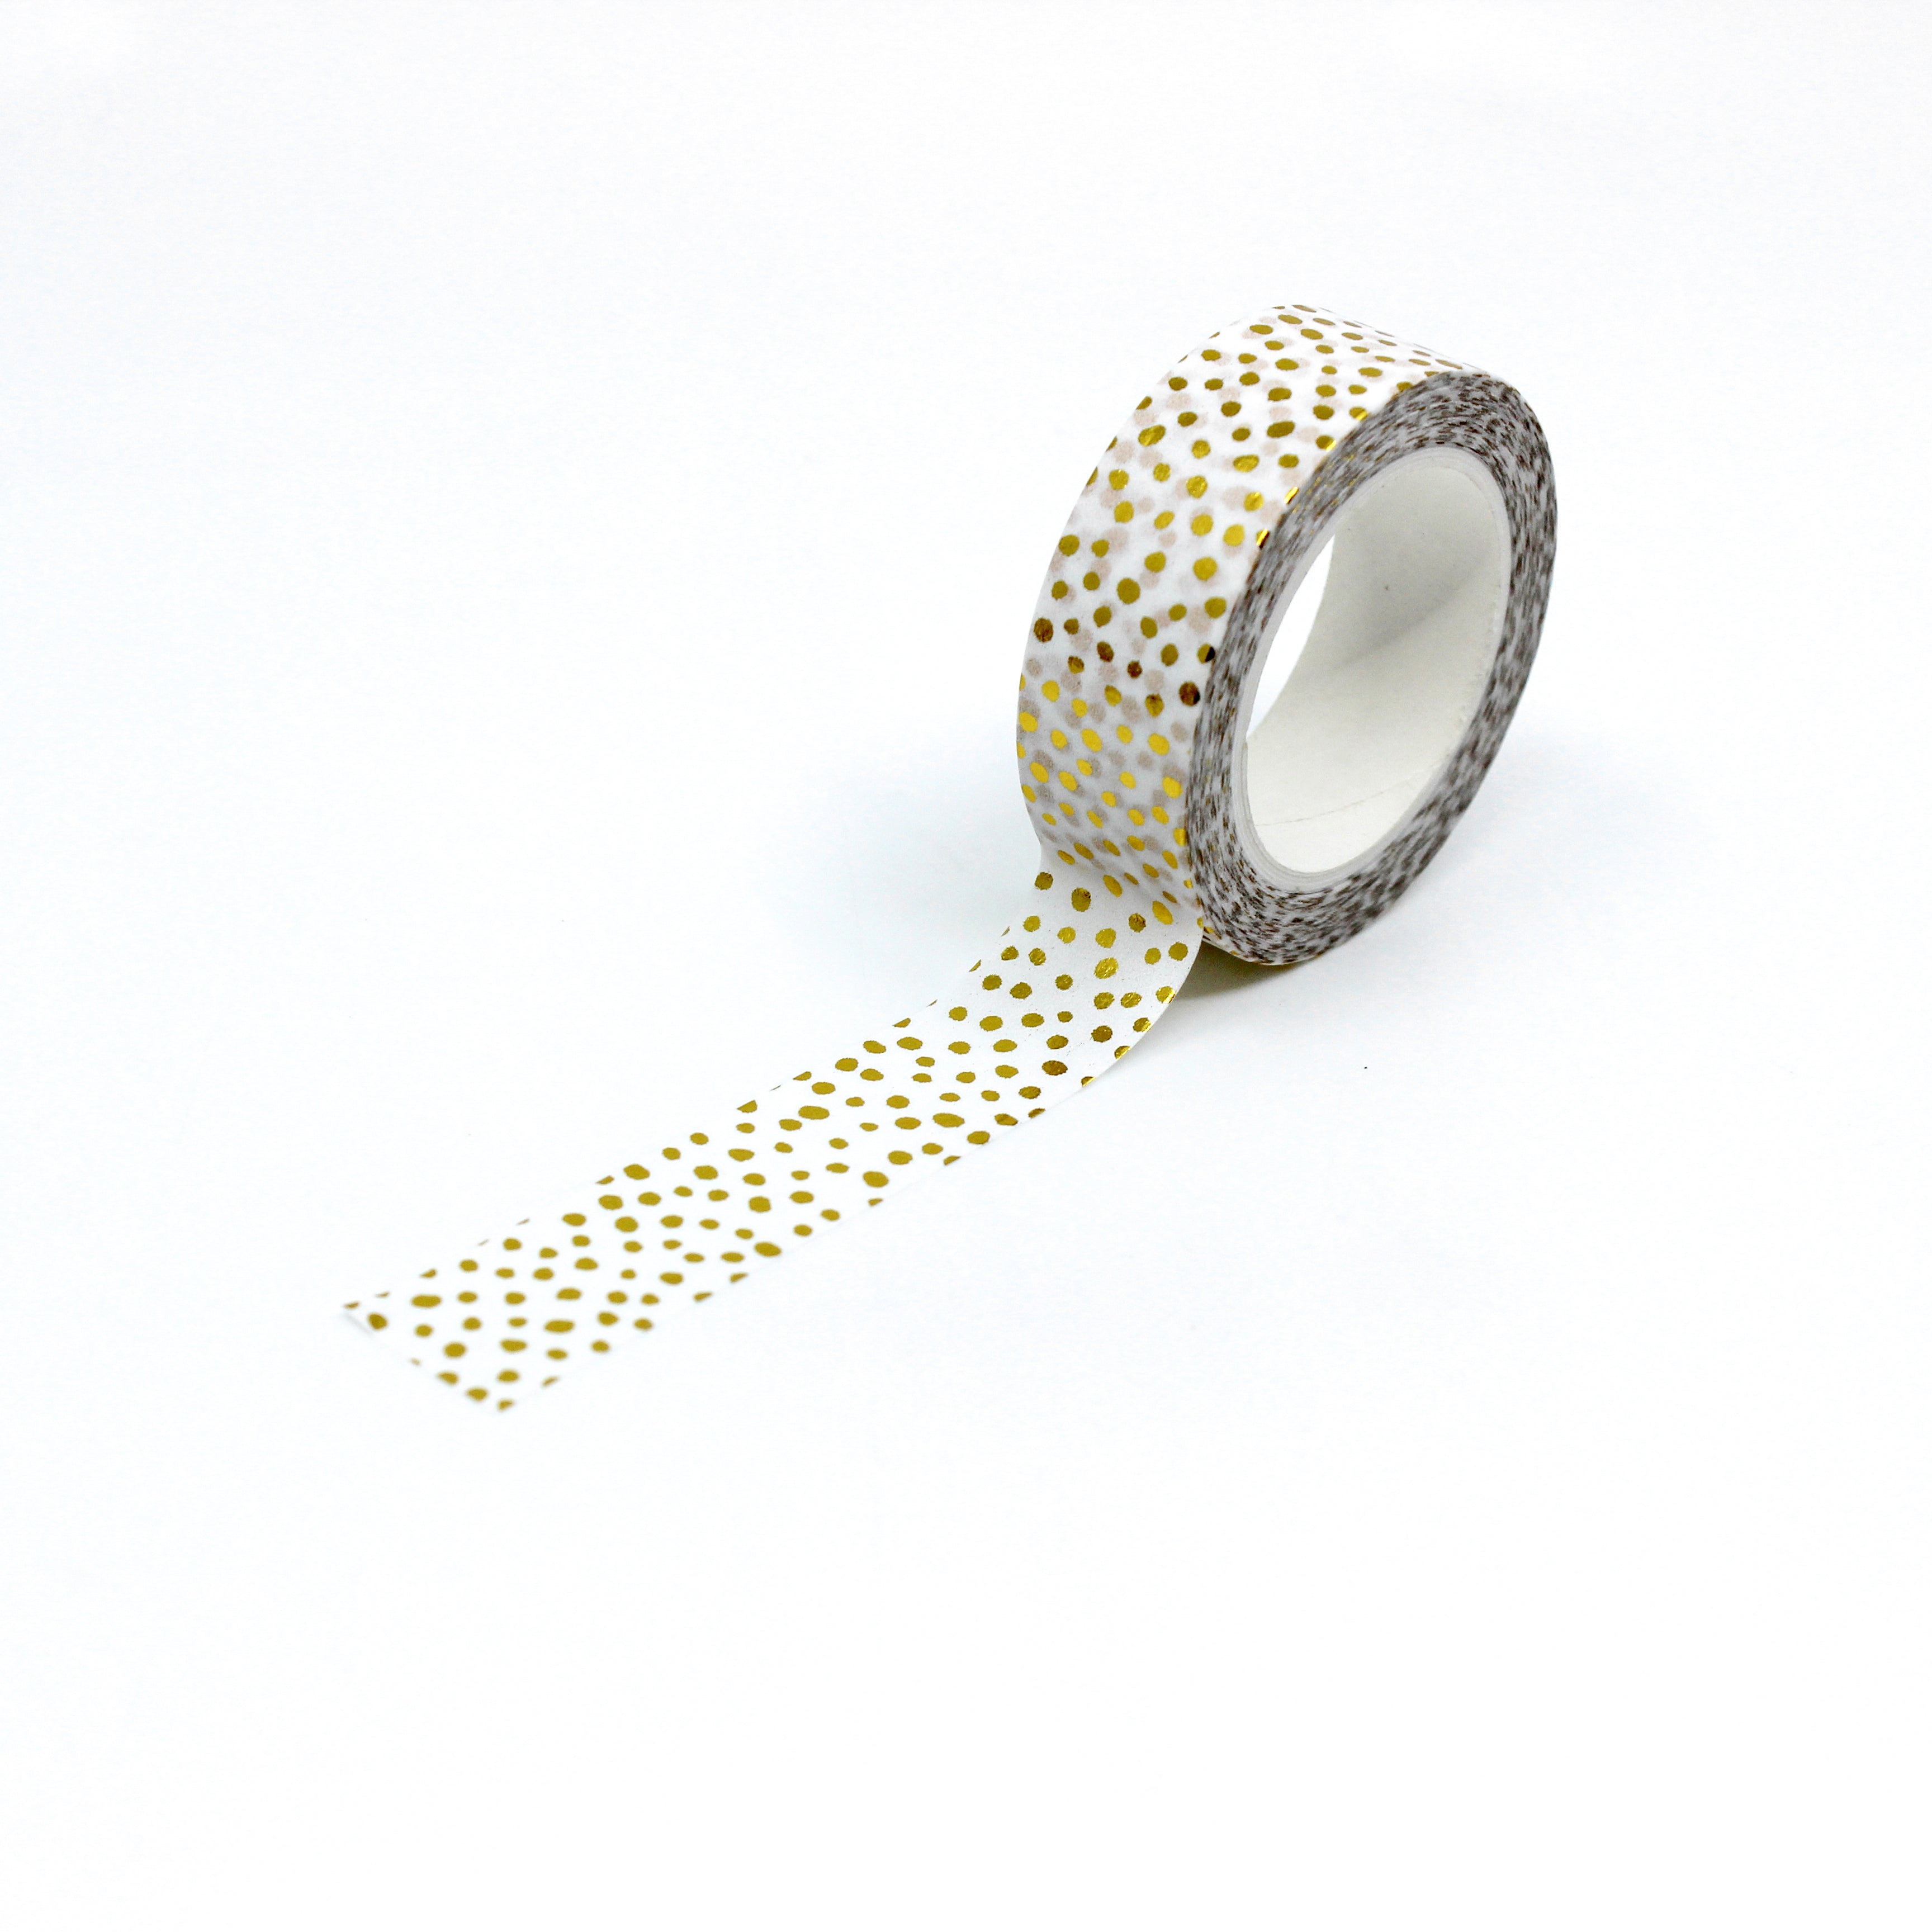 Elevate your crafts with our glamorous gold foil dotted washi tape adorned with playful polka dots and shimmering party confetti, perfect for adding a touch of joy and excitement. This tape is sold at BBB Supplies Craft Shop.